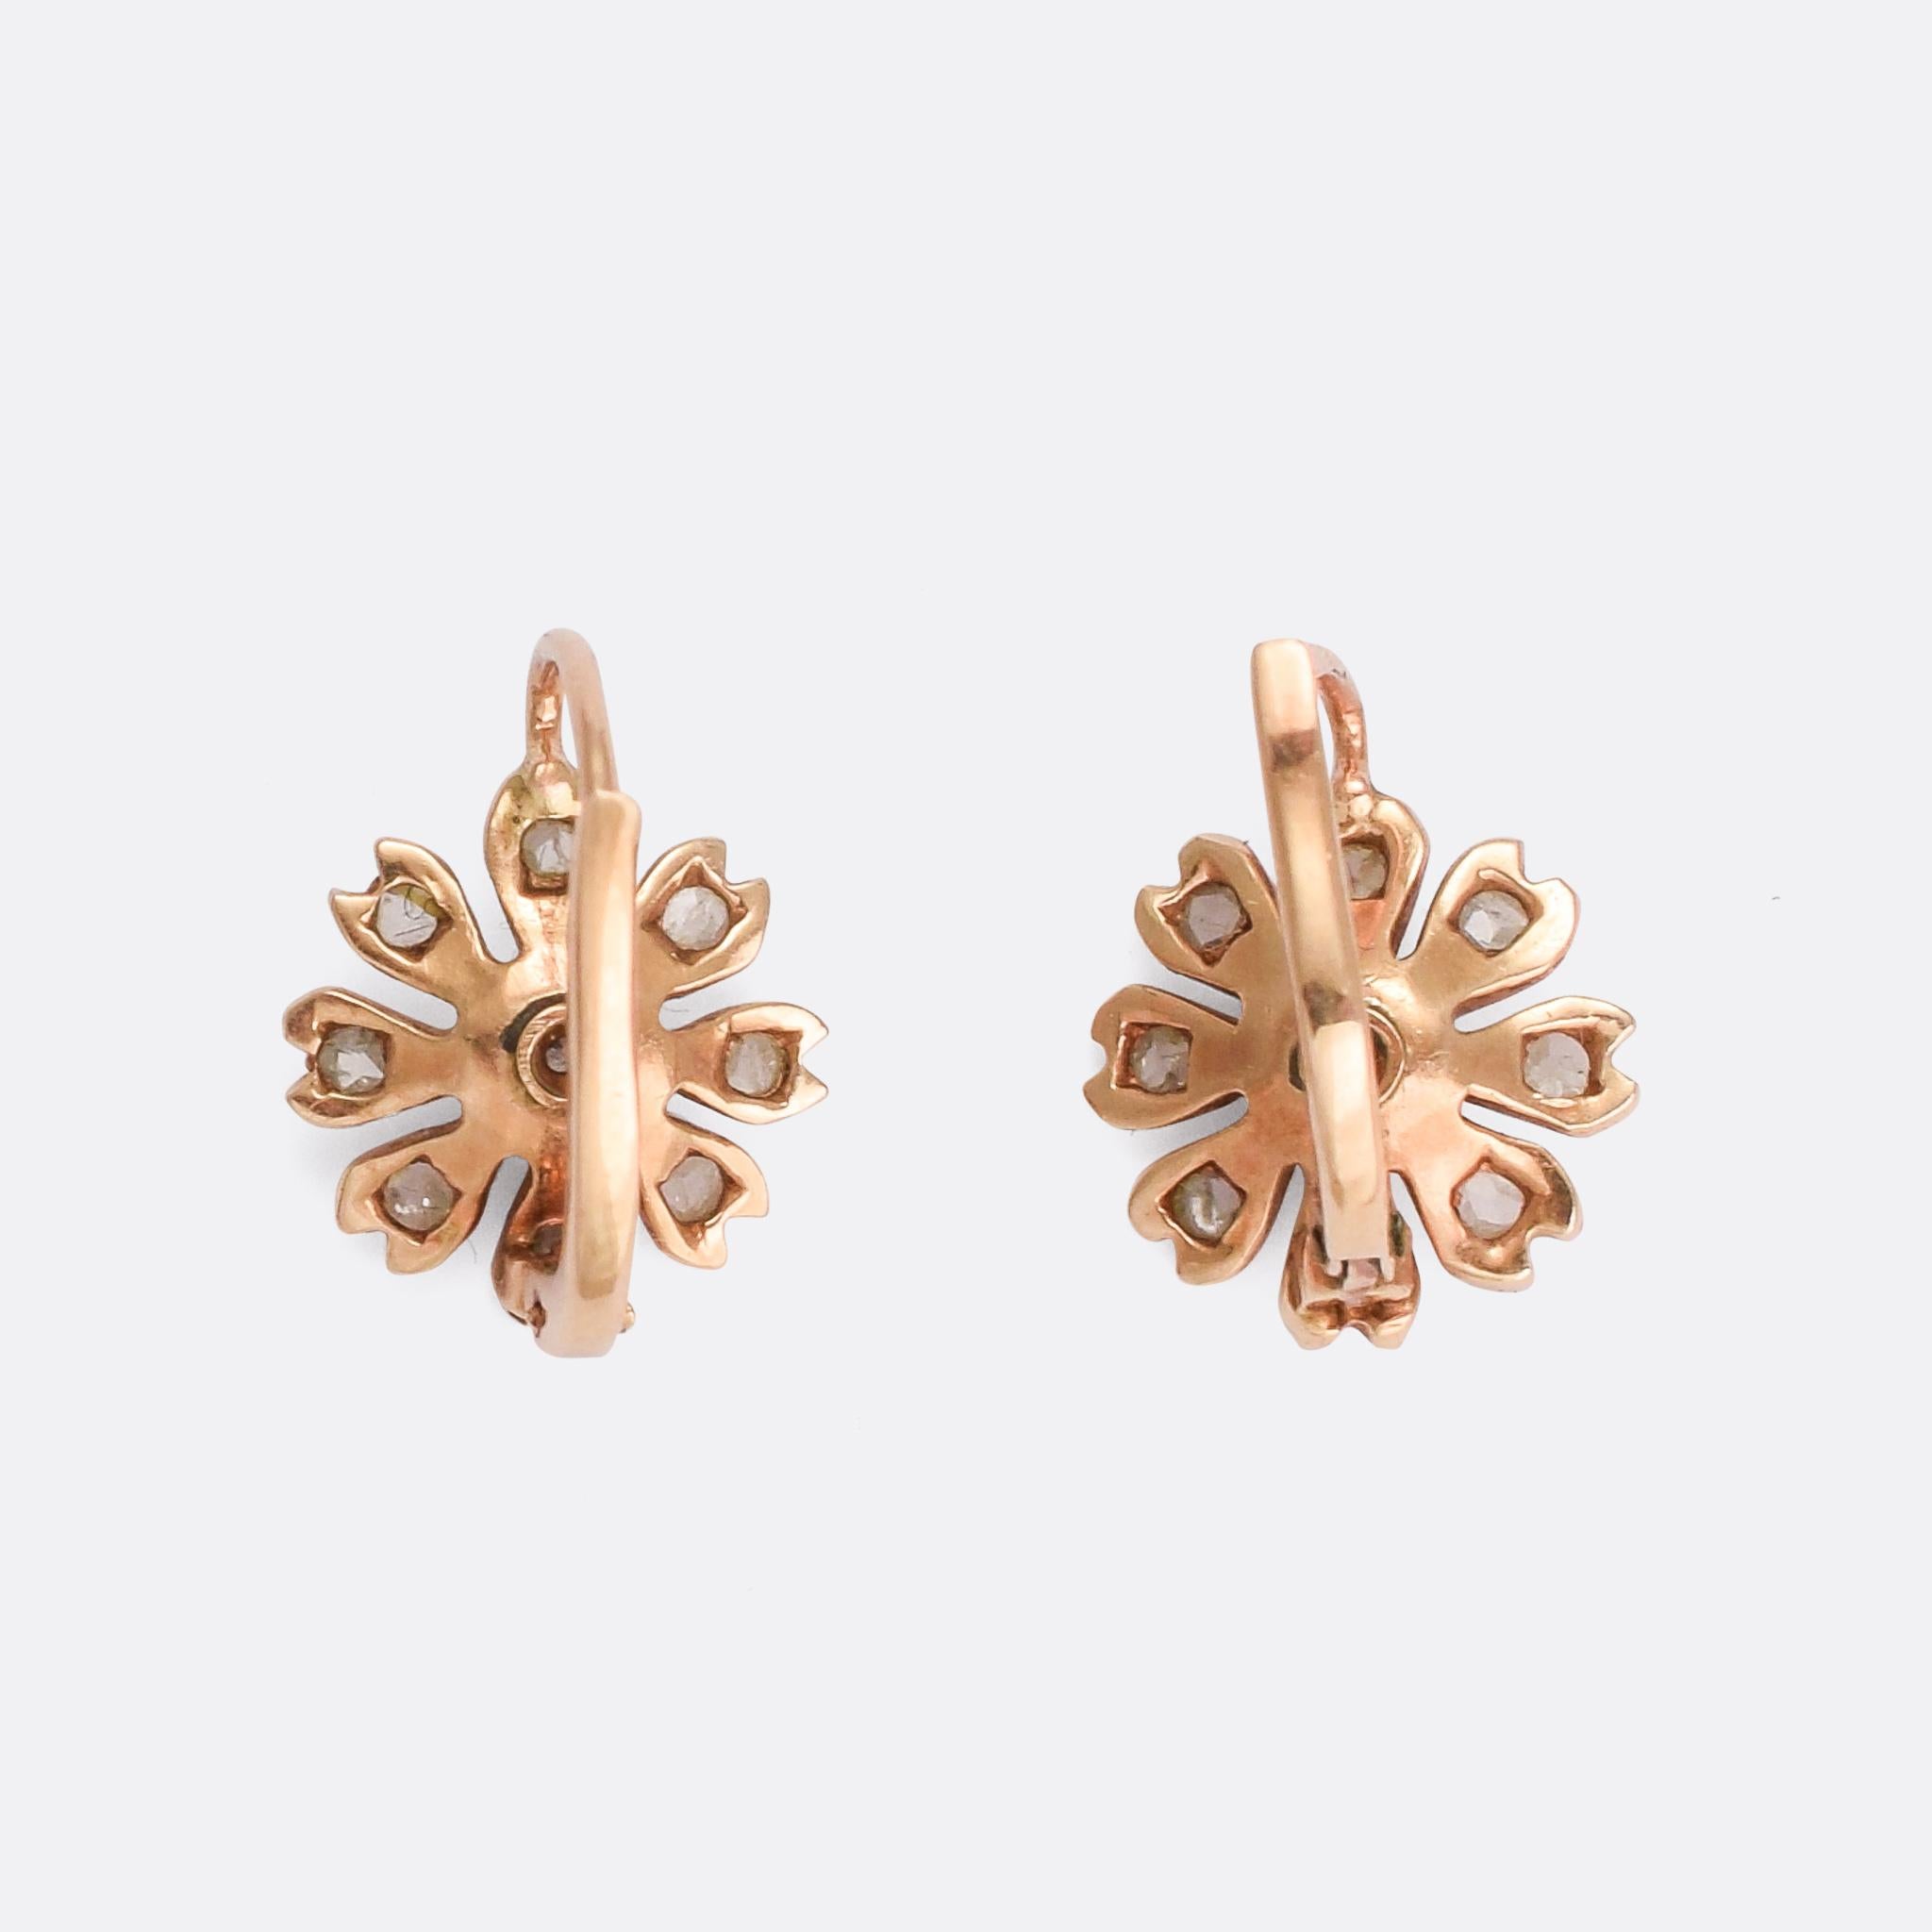 The prettiest pair of diamond flower earrings... dating from the late Victorian era they're modelled in 14k rose gold and set with white diamonds - likely of Swiss origin. They're very sweet, and very wearable.

STONES 
Old Mine Cut Diamonds and